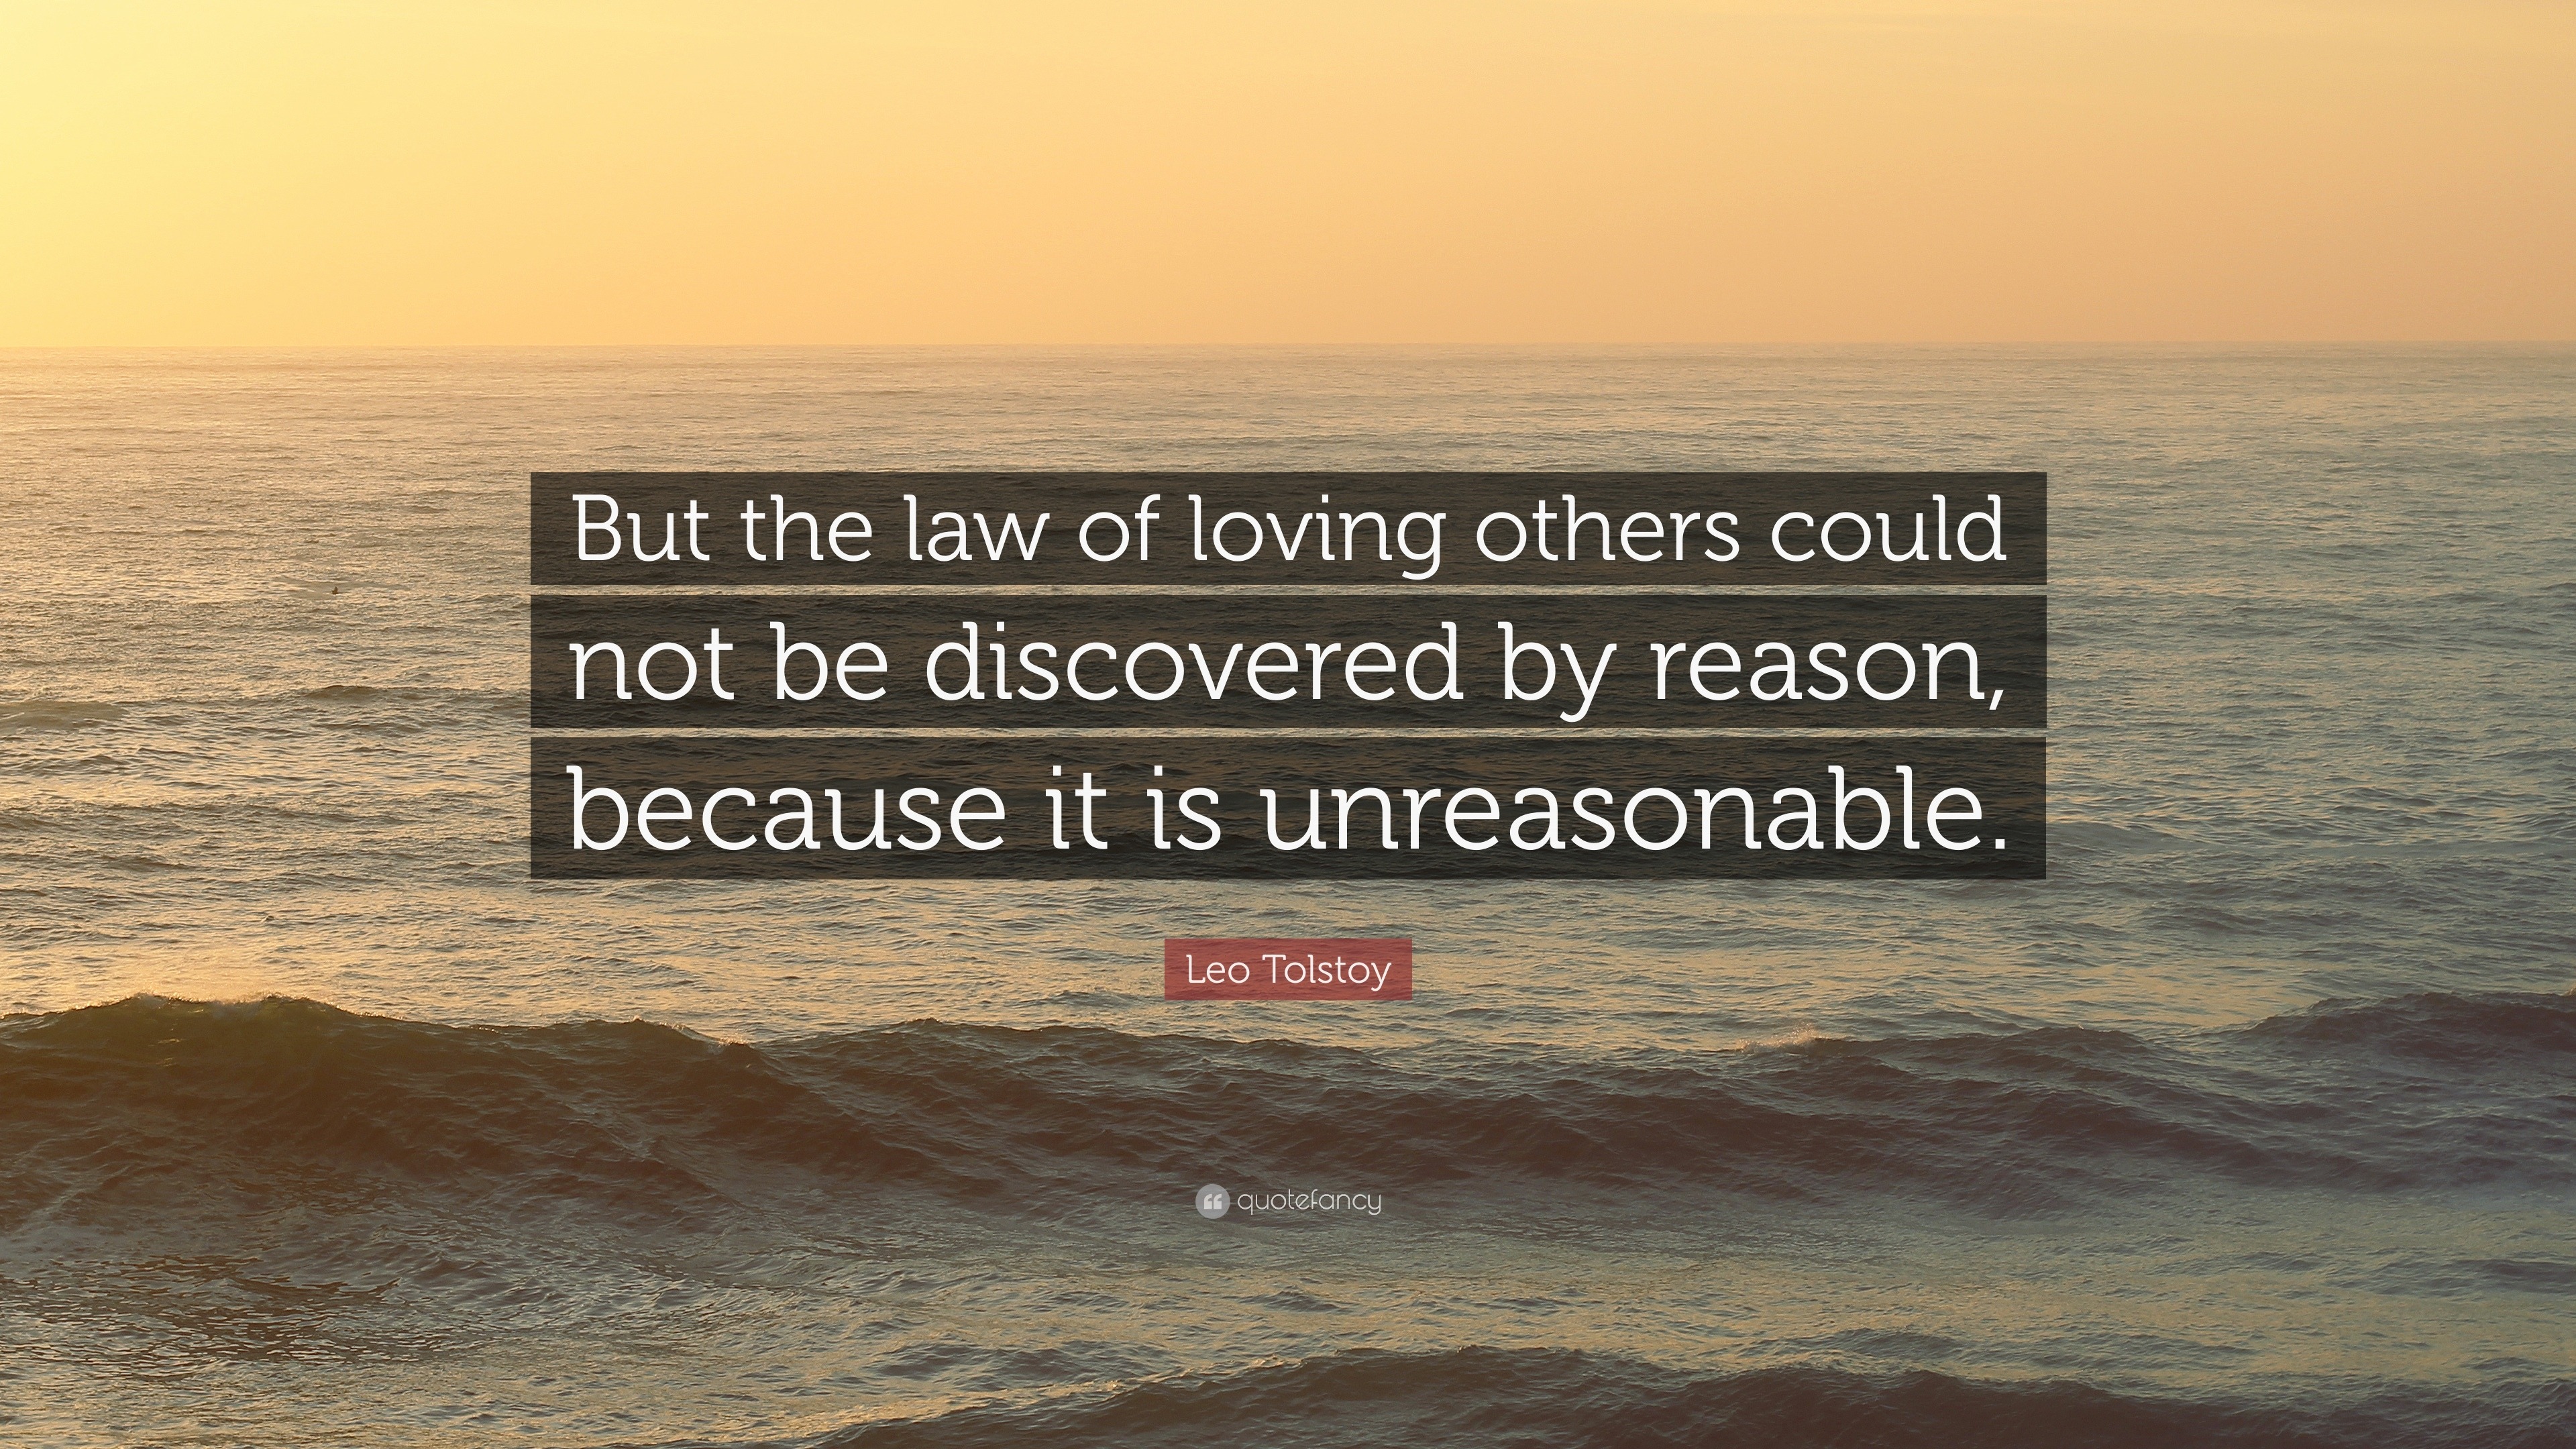 Leo Tolstoy Quote “But the law of loving others could not be discovered by